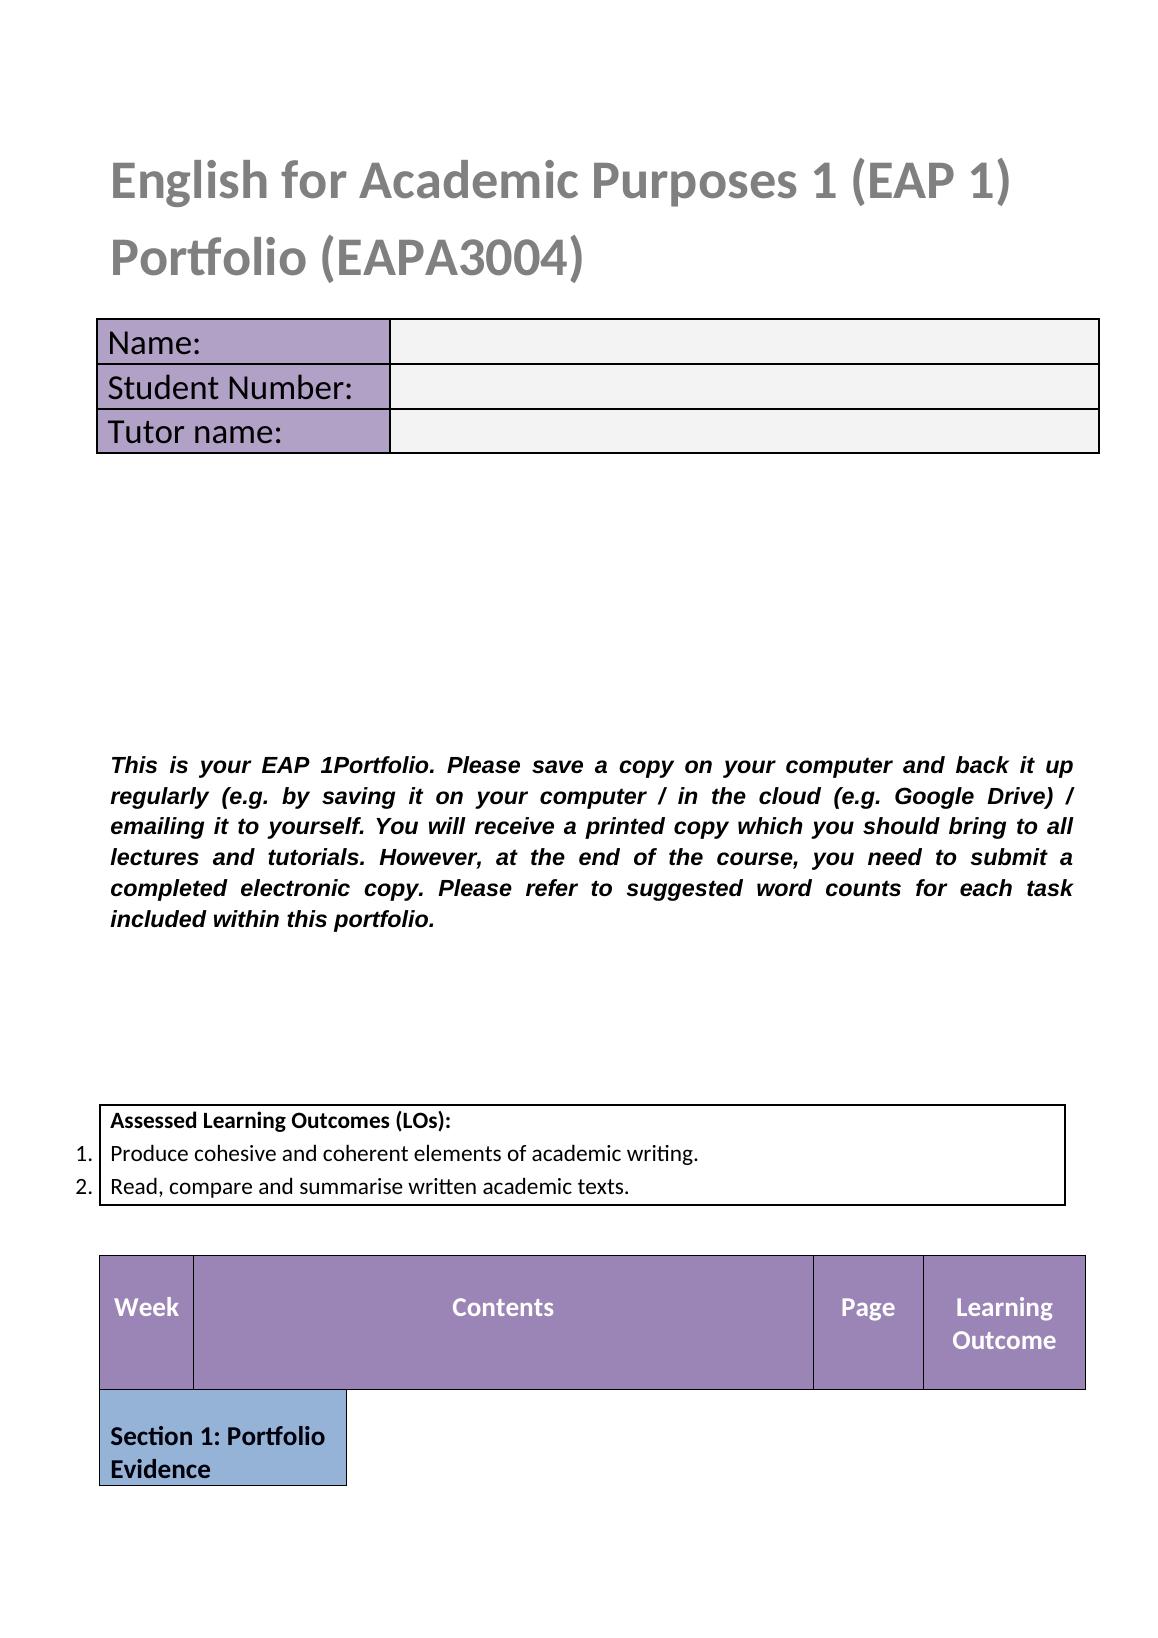 EAPA3004 : English for Academic Purposes Assignment_1